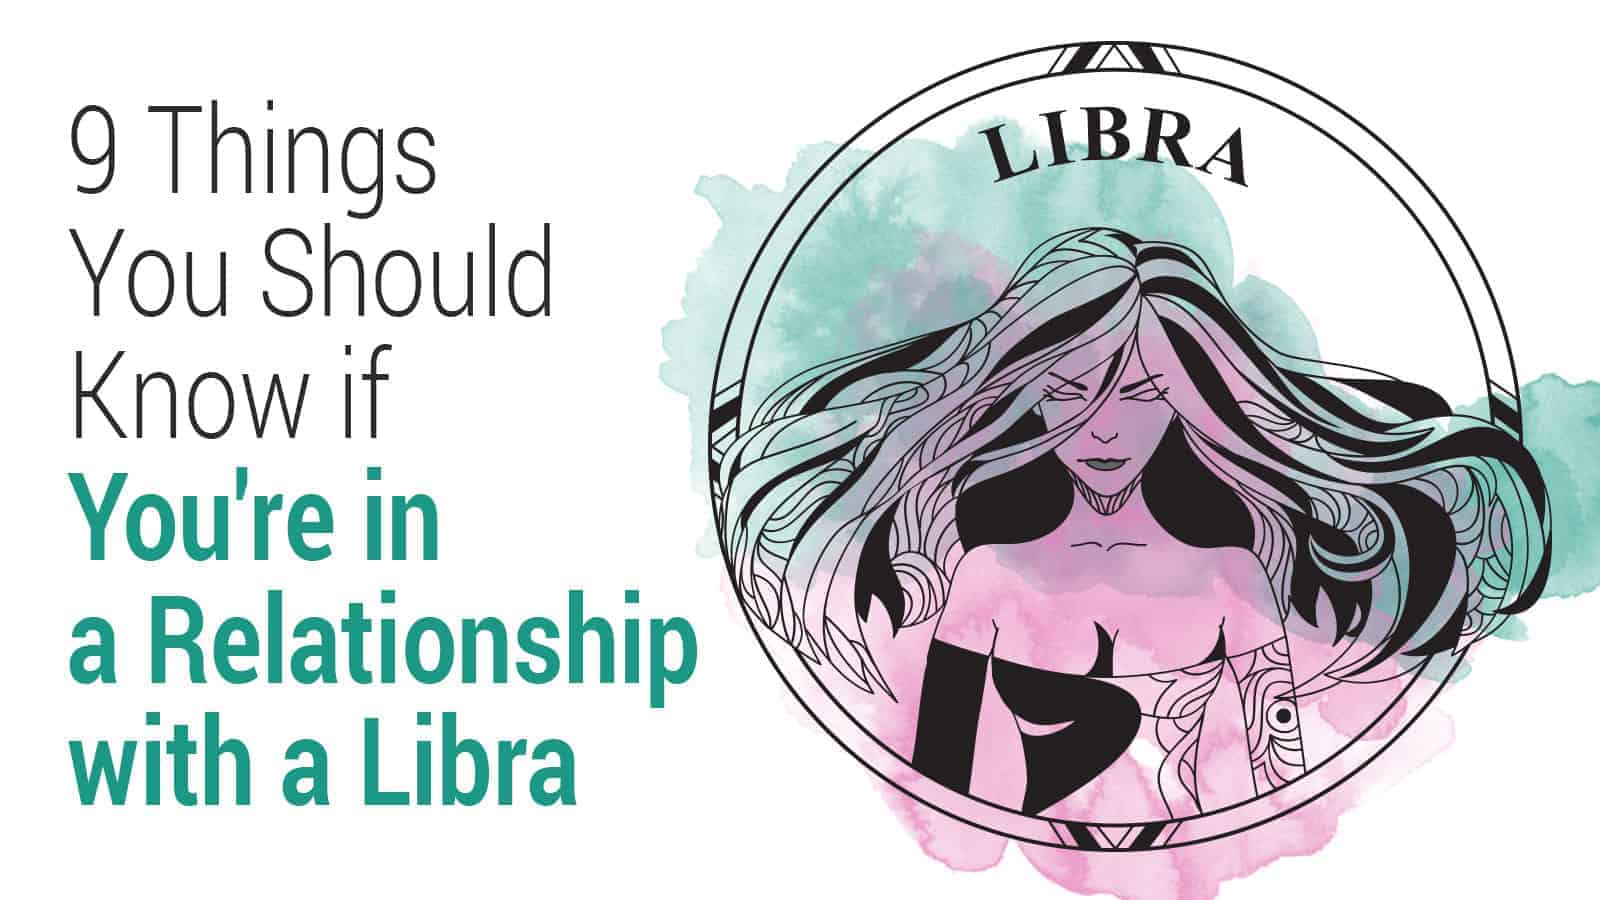 9 Things You Should Know if You’re in a Relationship with a Libra